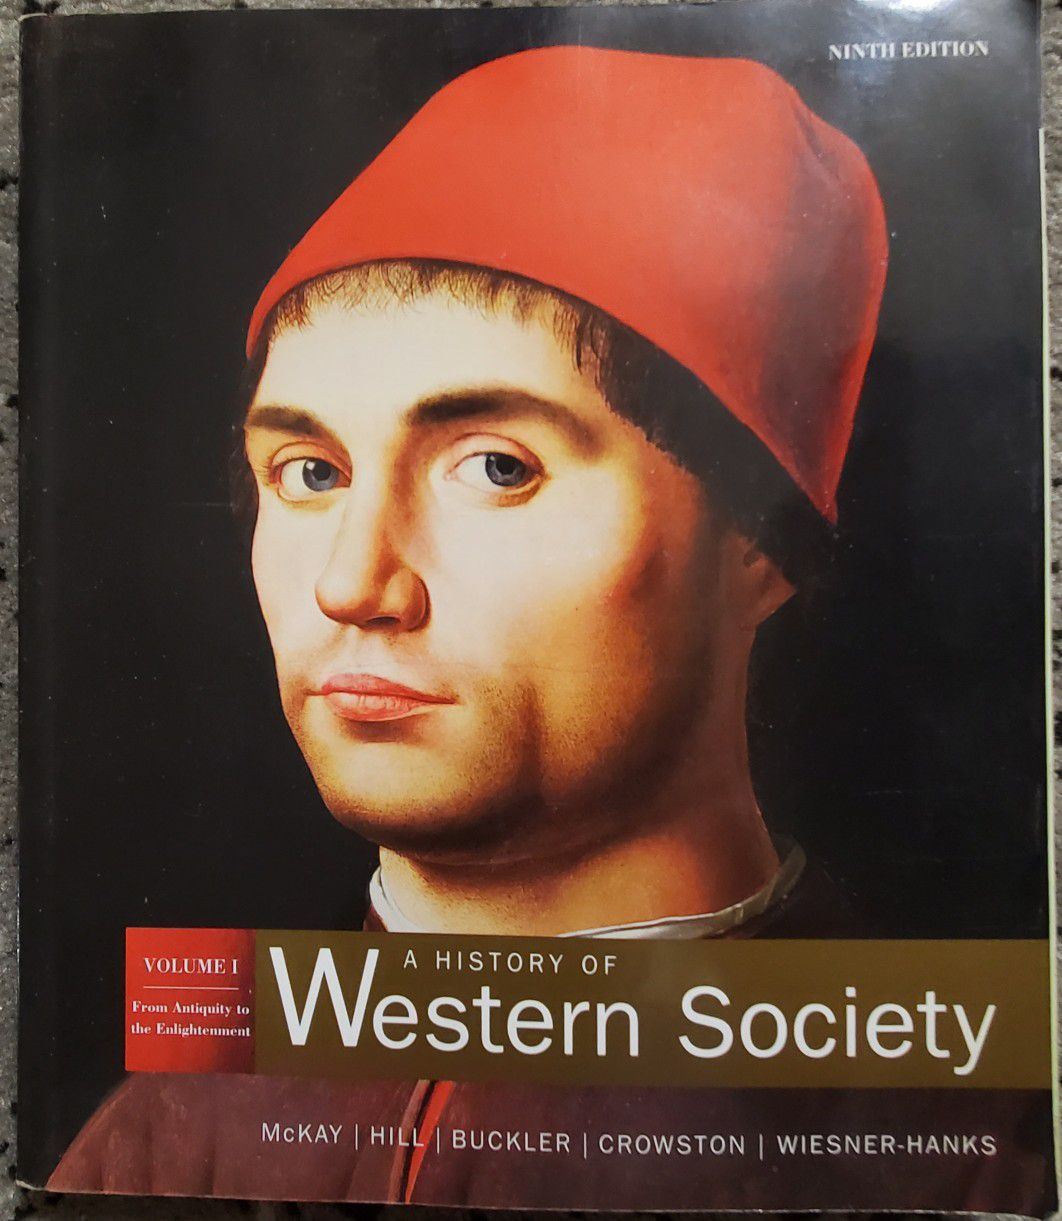 A History of Western Society Vol 1: From Antiquity to the Enlightenment